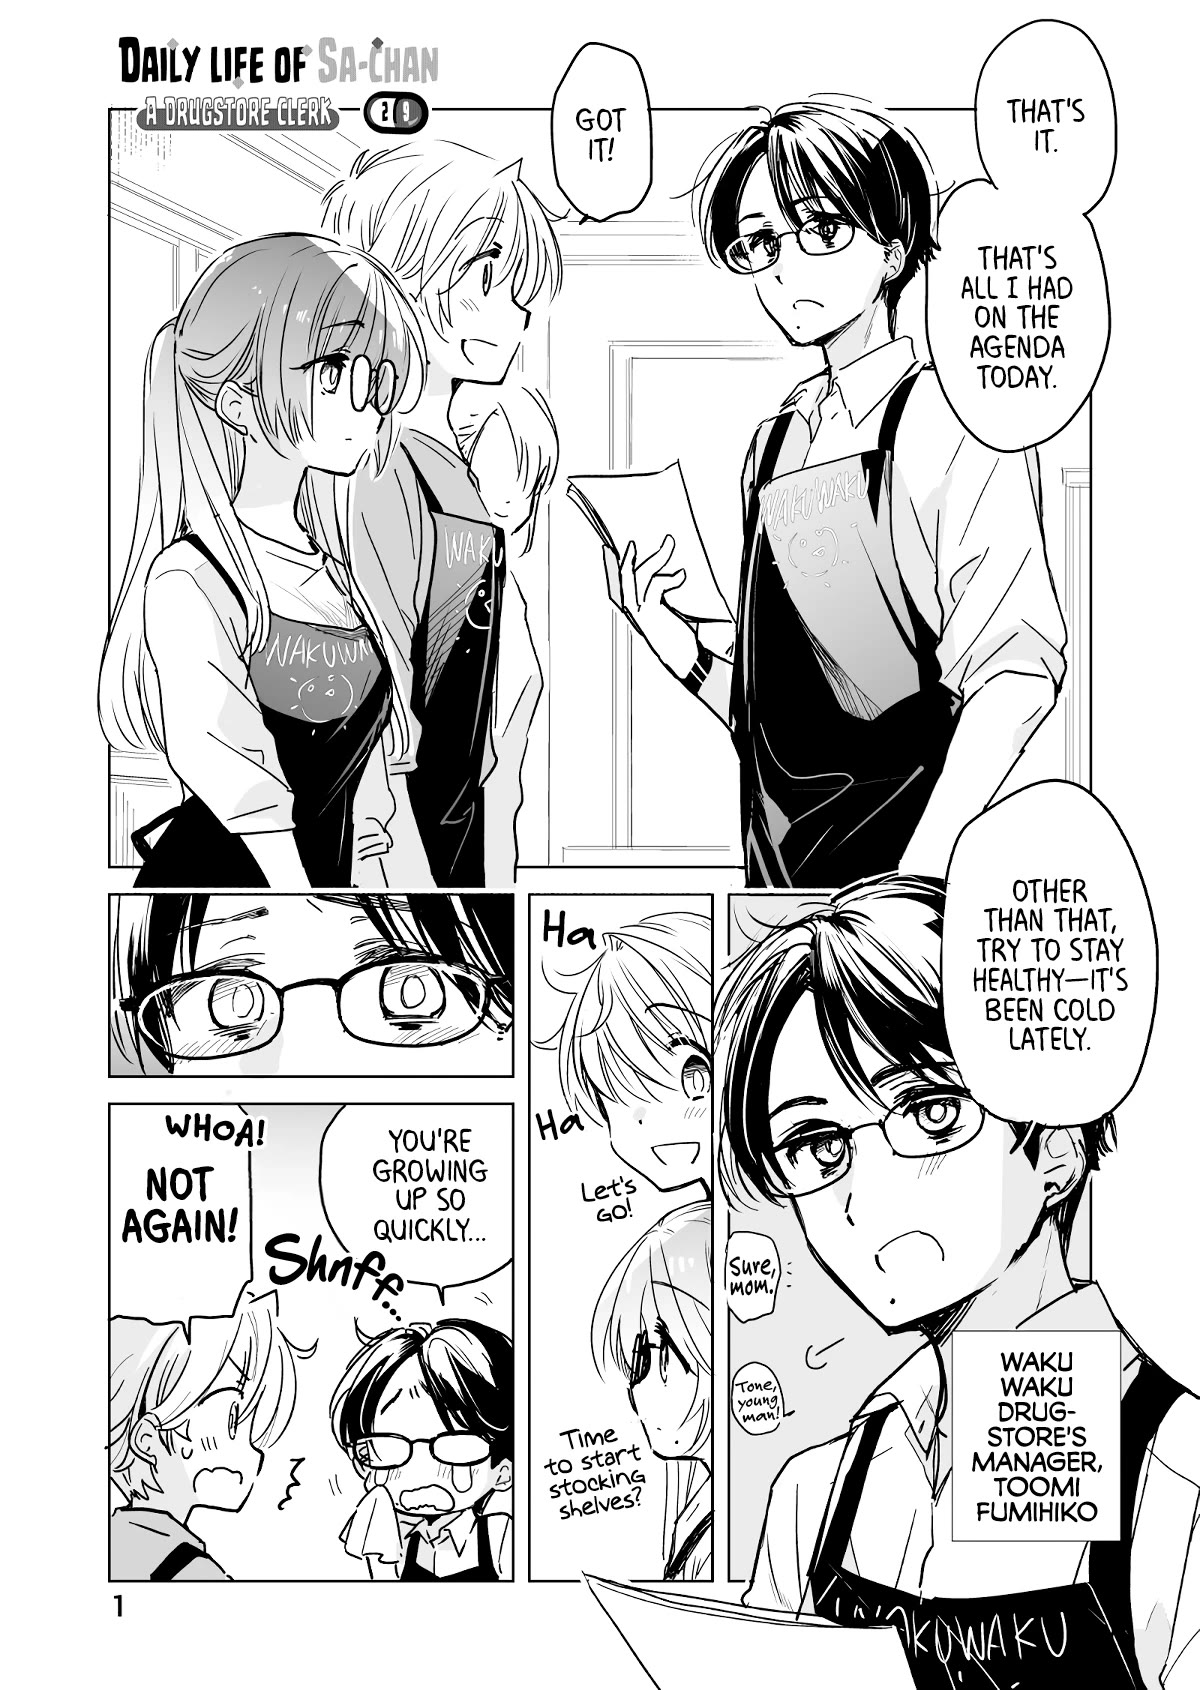 Daily Life Of Sa-Chan, A Drugstore Clerk - chapter 29 - #1